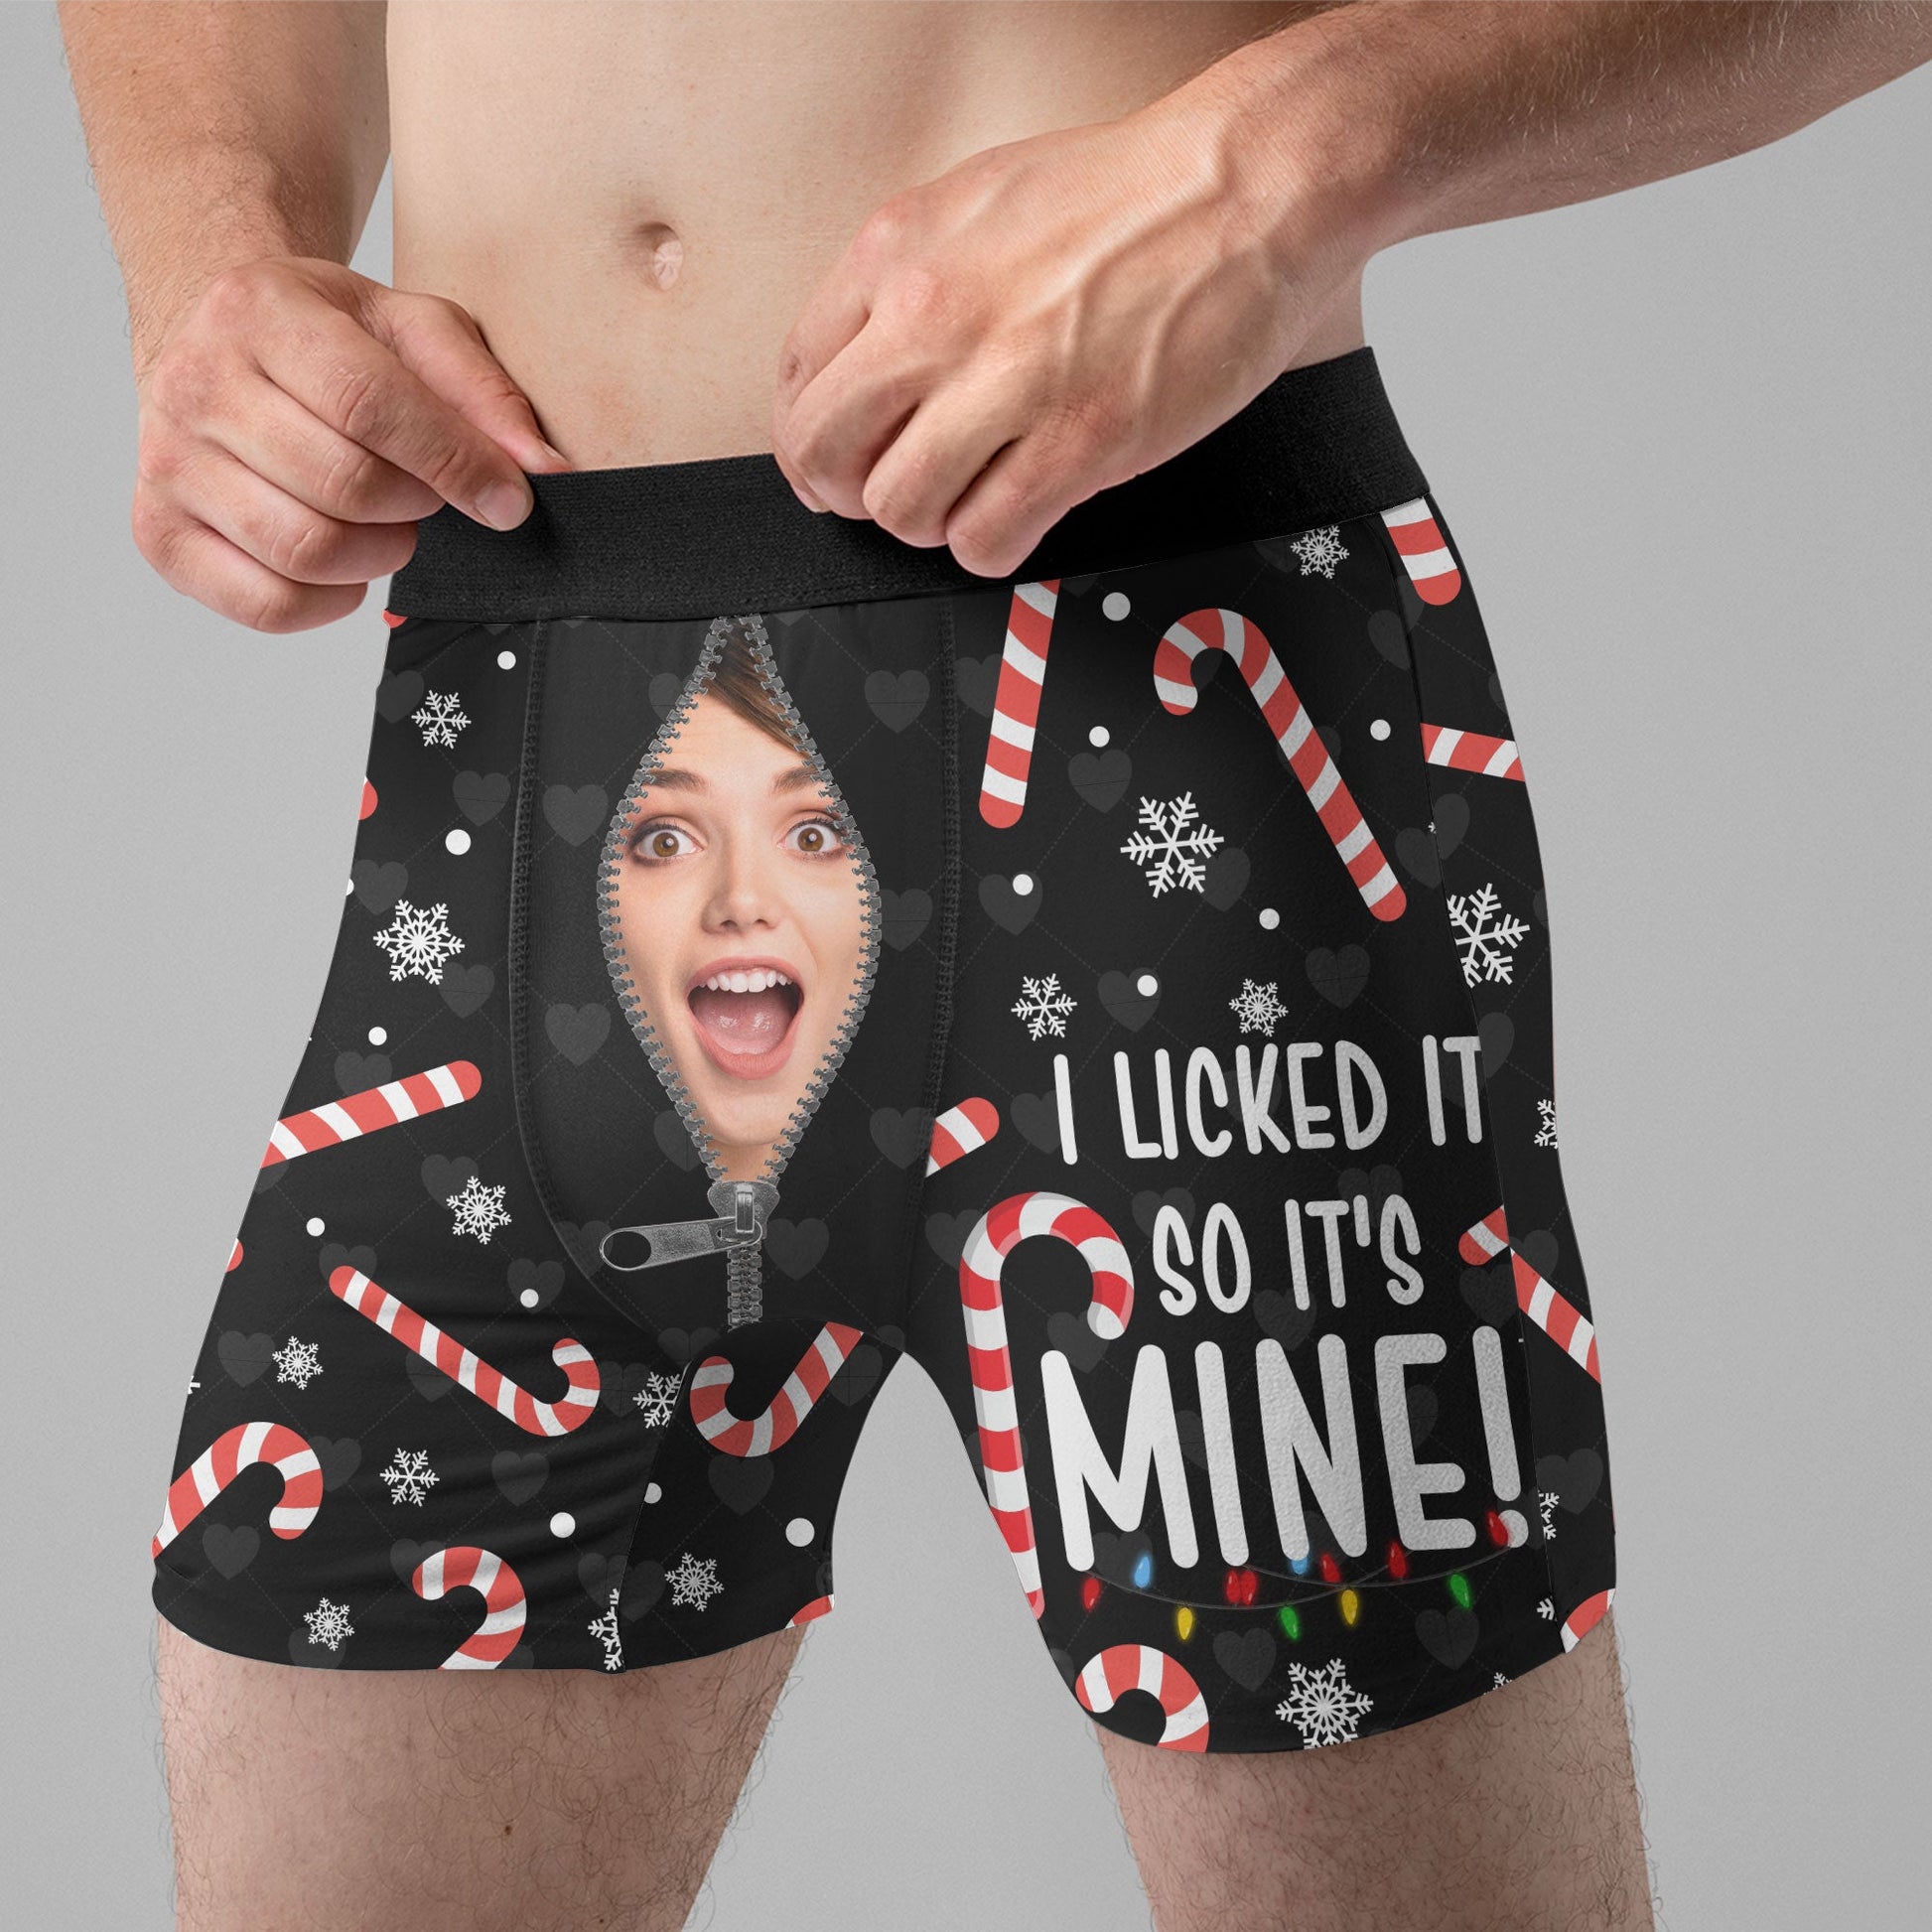 Funny Gift for husband or Boyfriend, Funny Underwear, I Licked it so it's  mines, Anniversary Gift